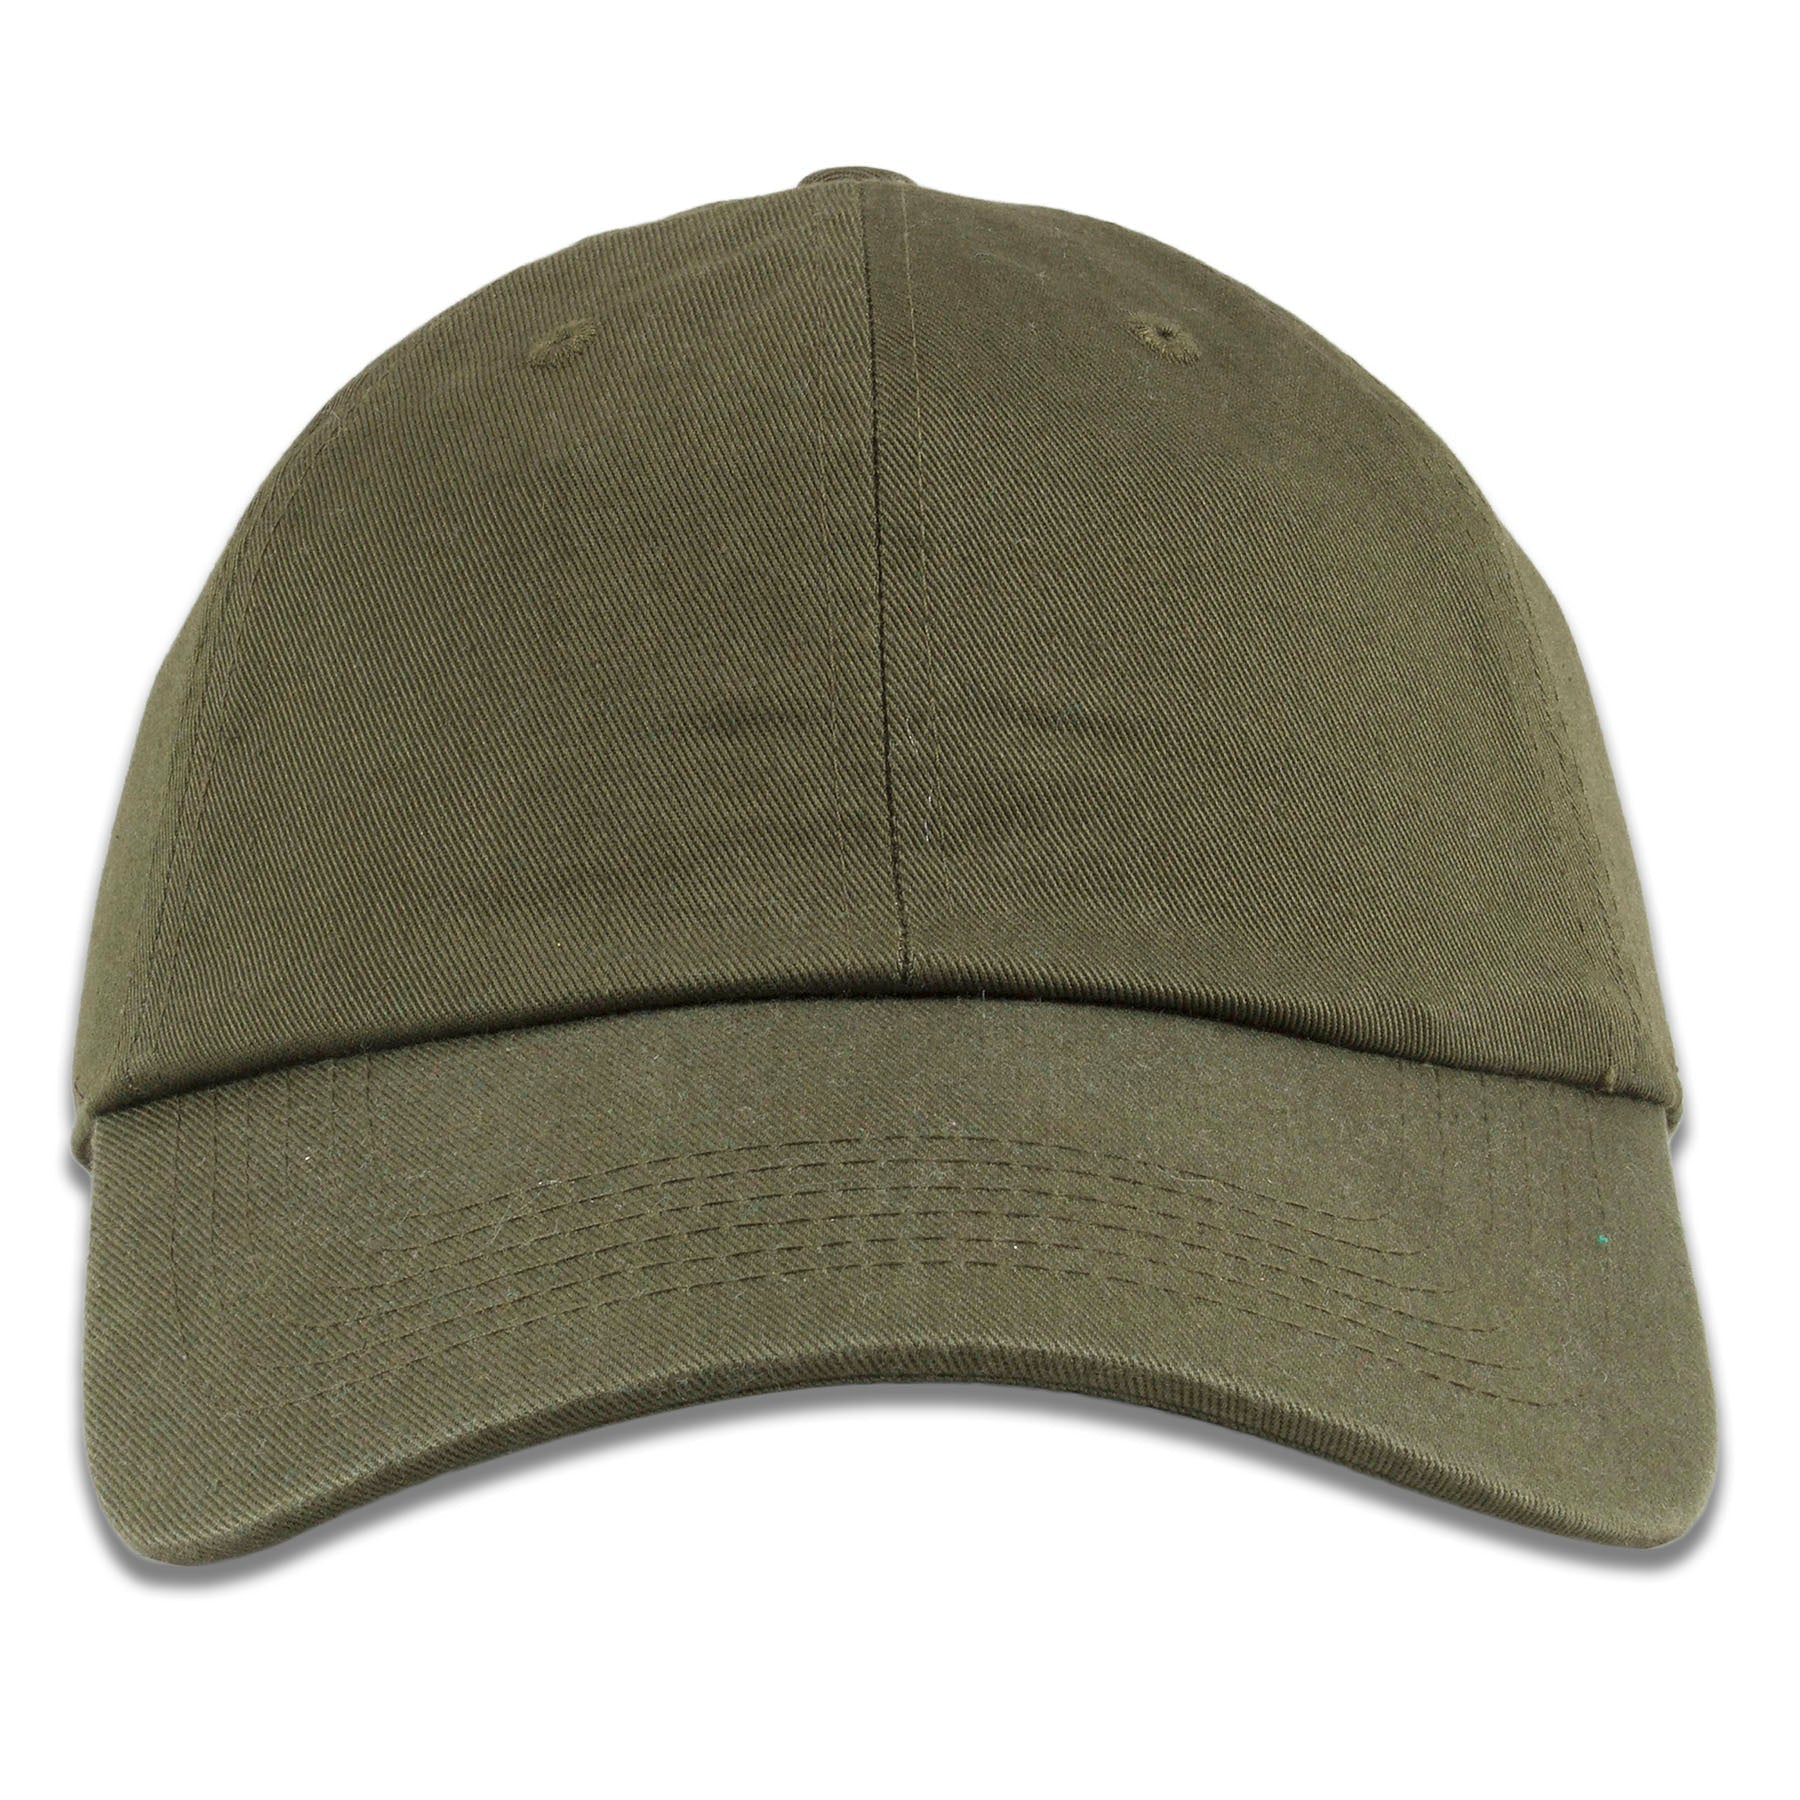 The olive blank baseball cap is olive green with an unstructured crown and bent brim